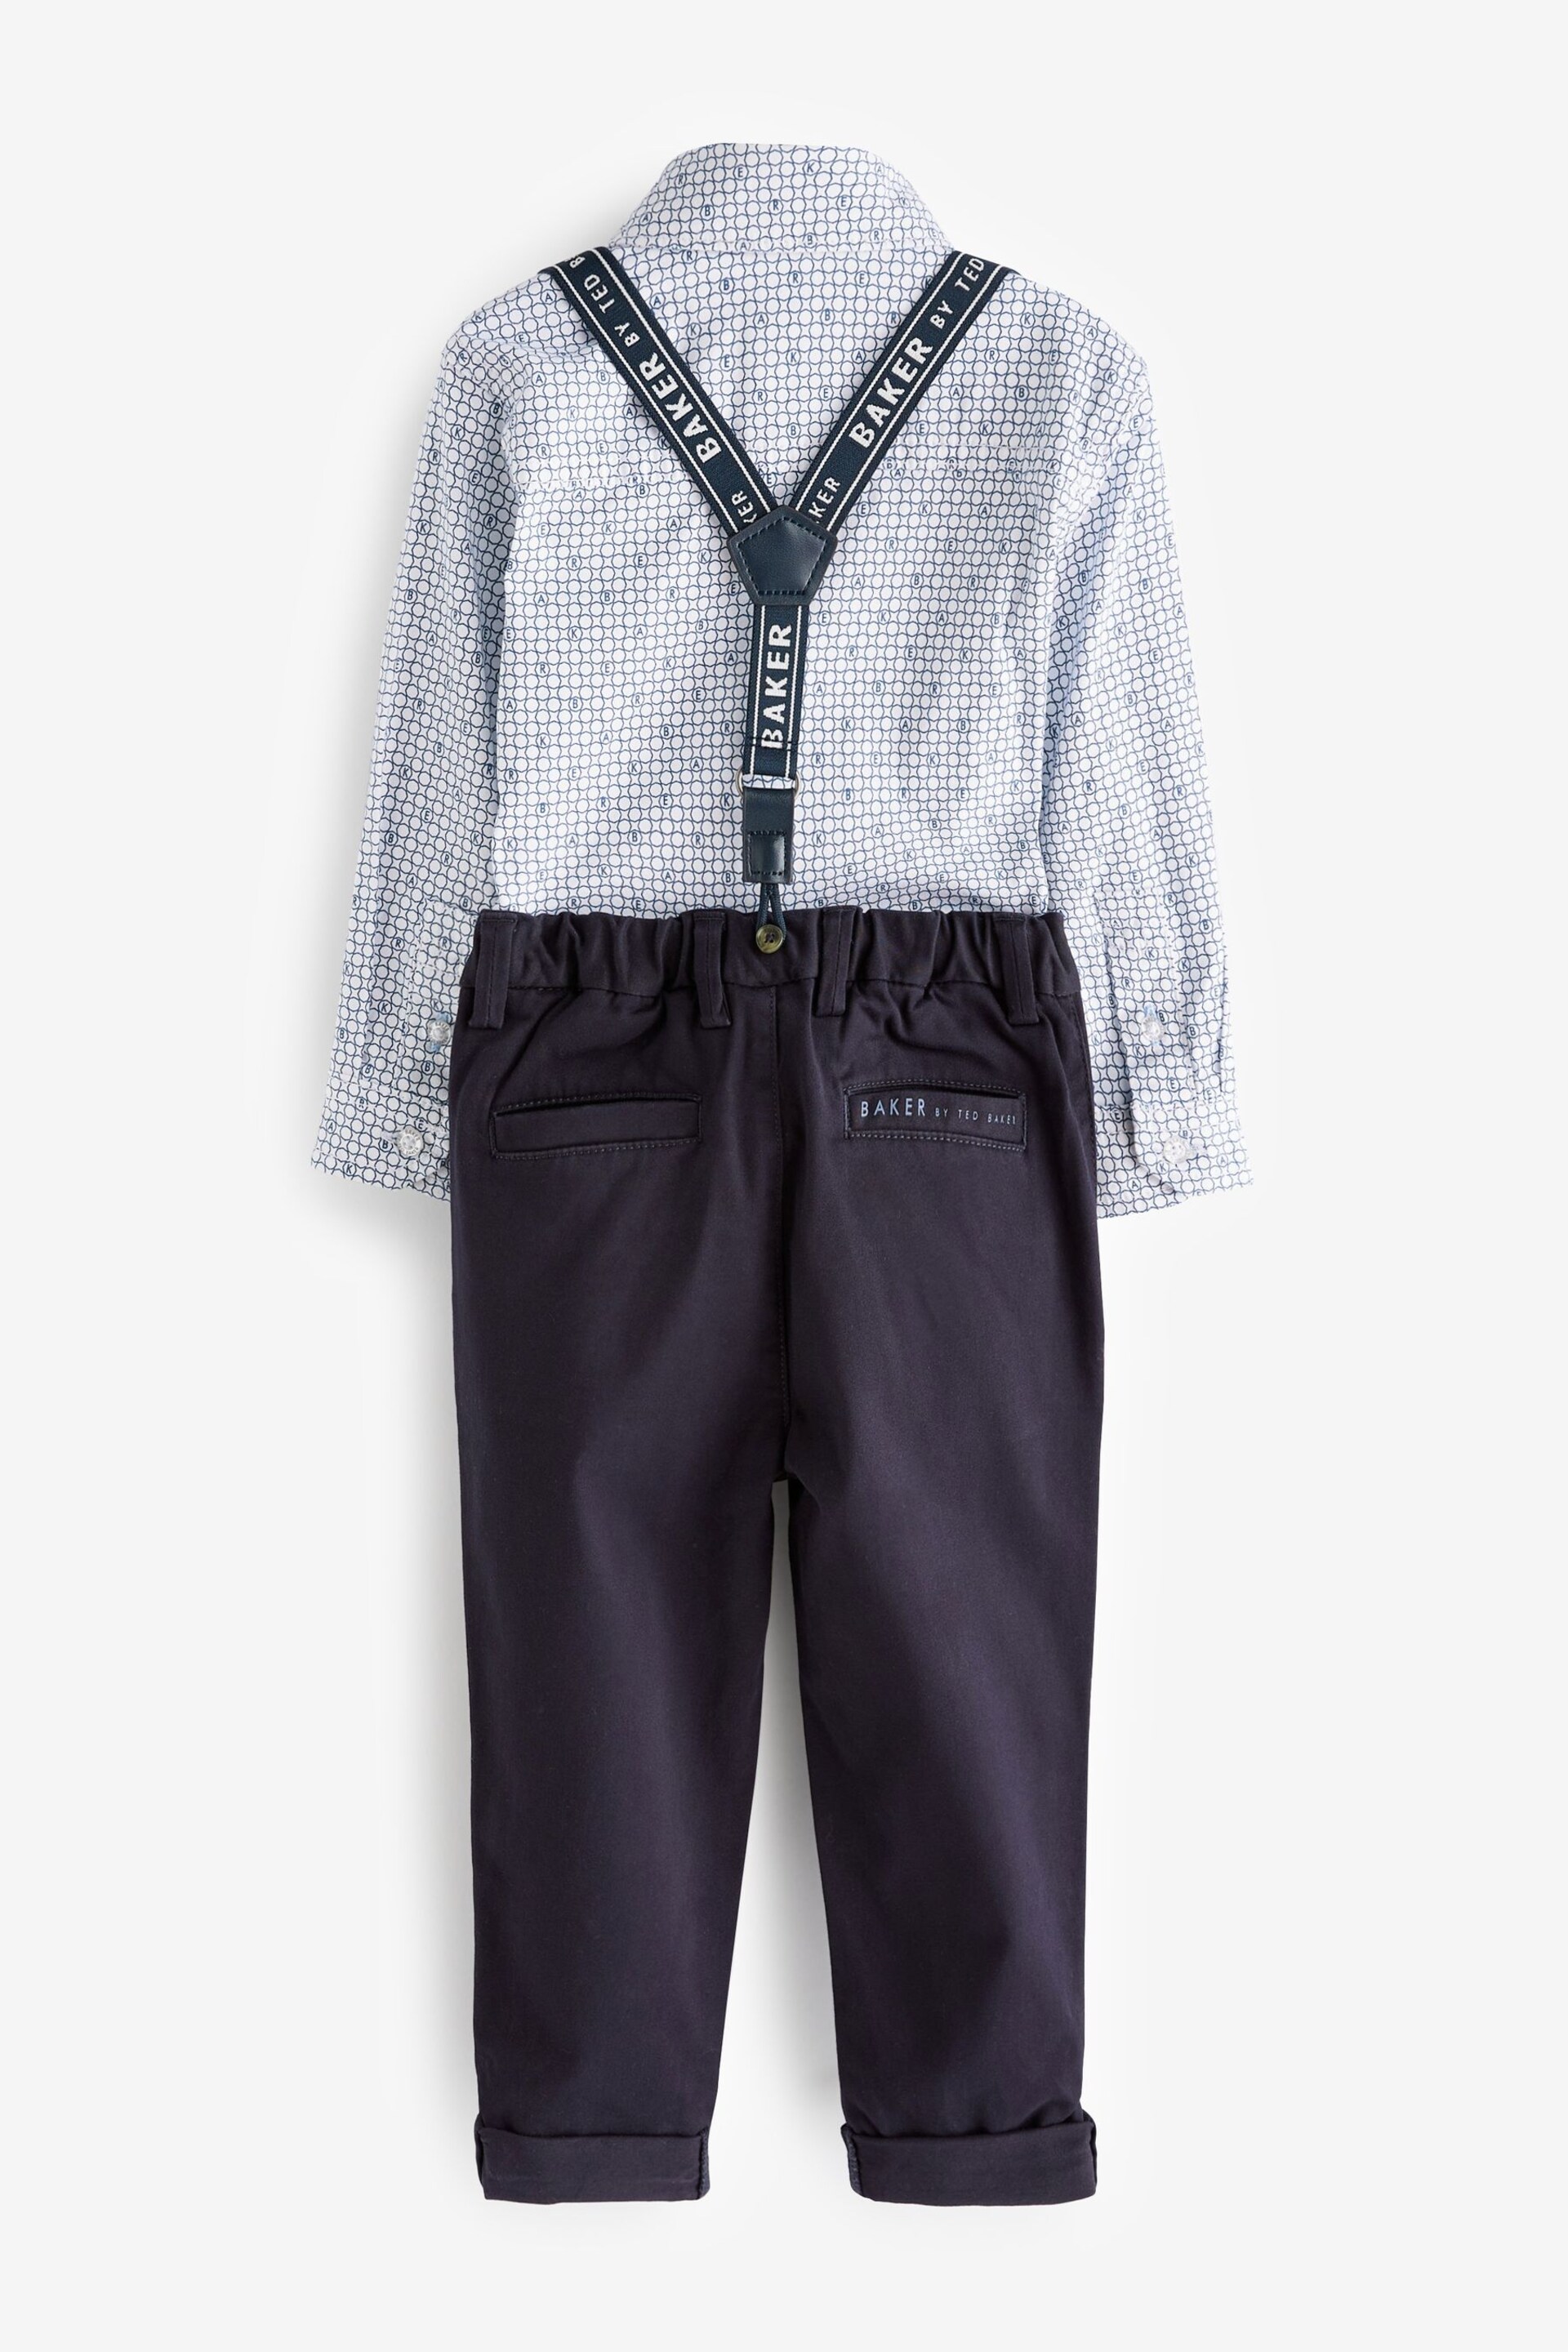 Baker by Ted Baker (3mths-6yrs) Shirt, Braces and Chino Set - Image 10 of 14